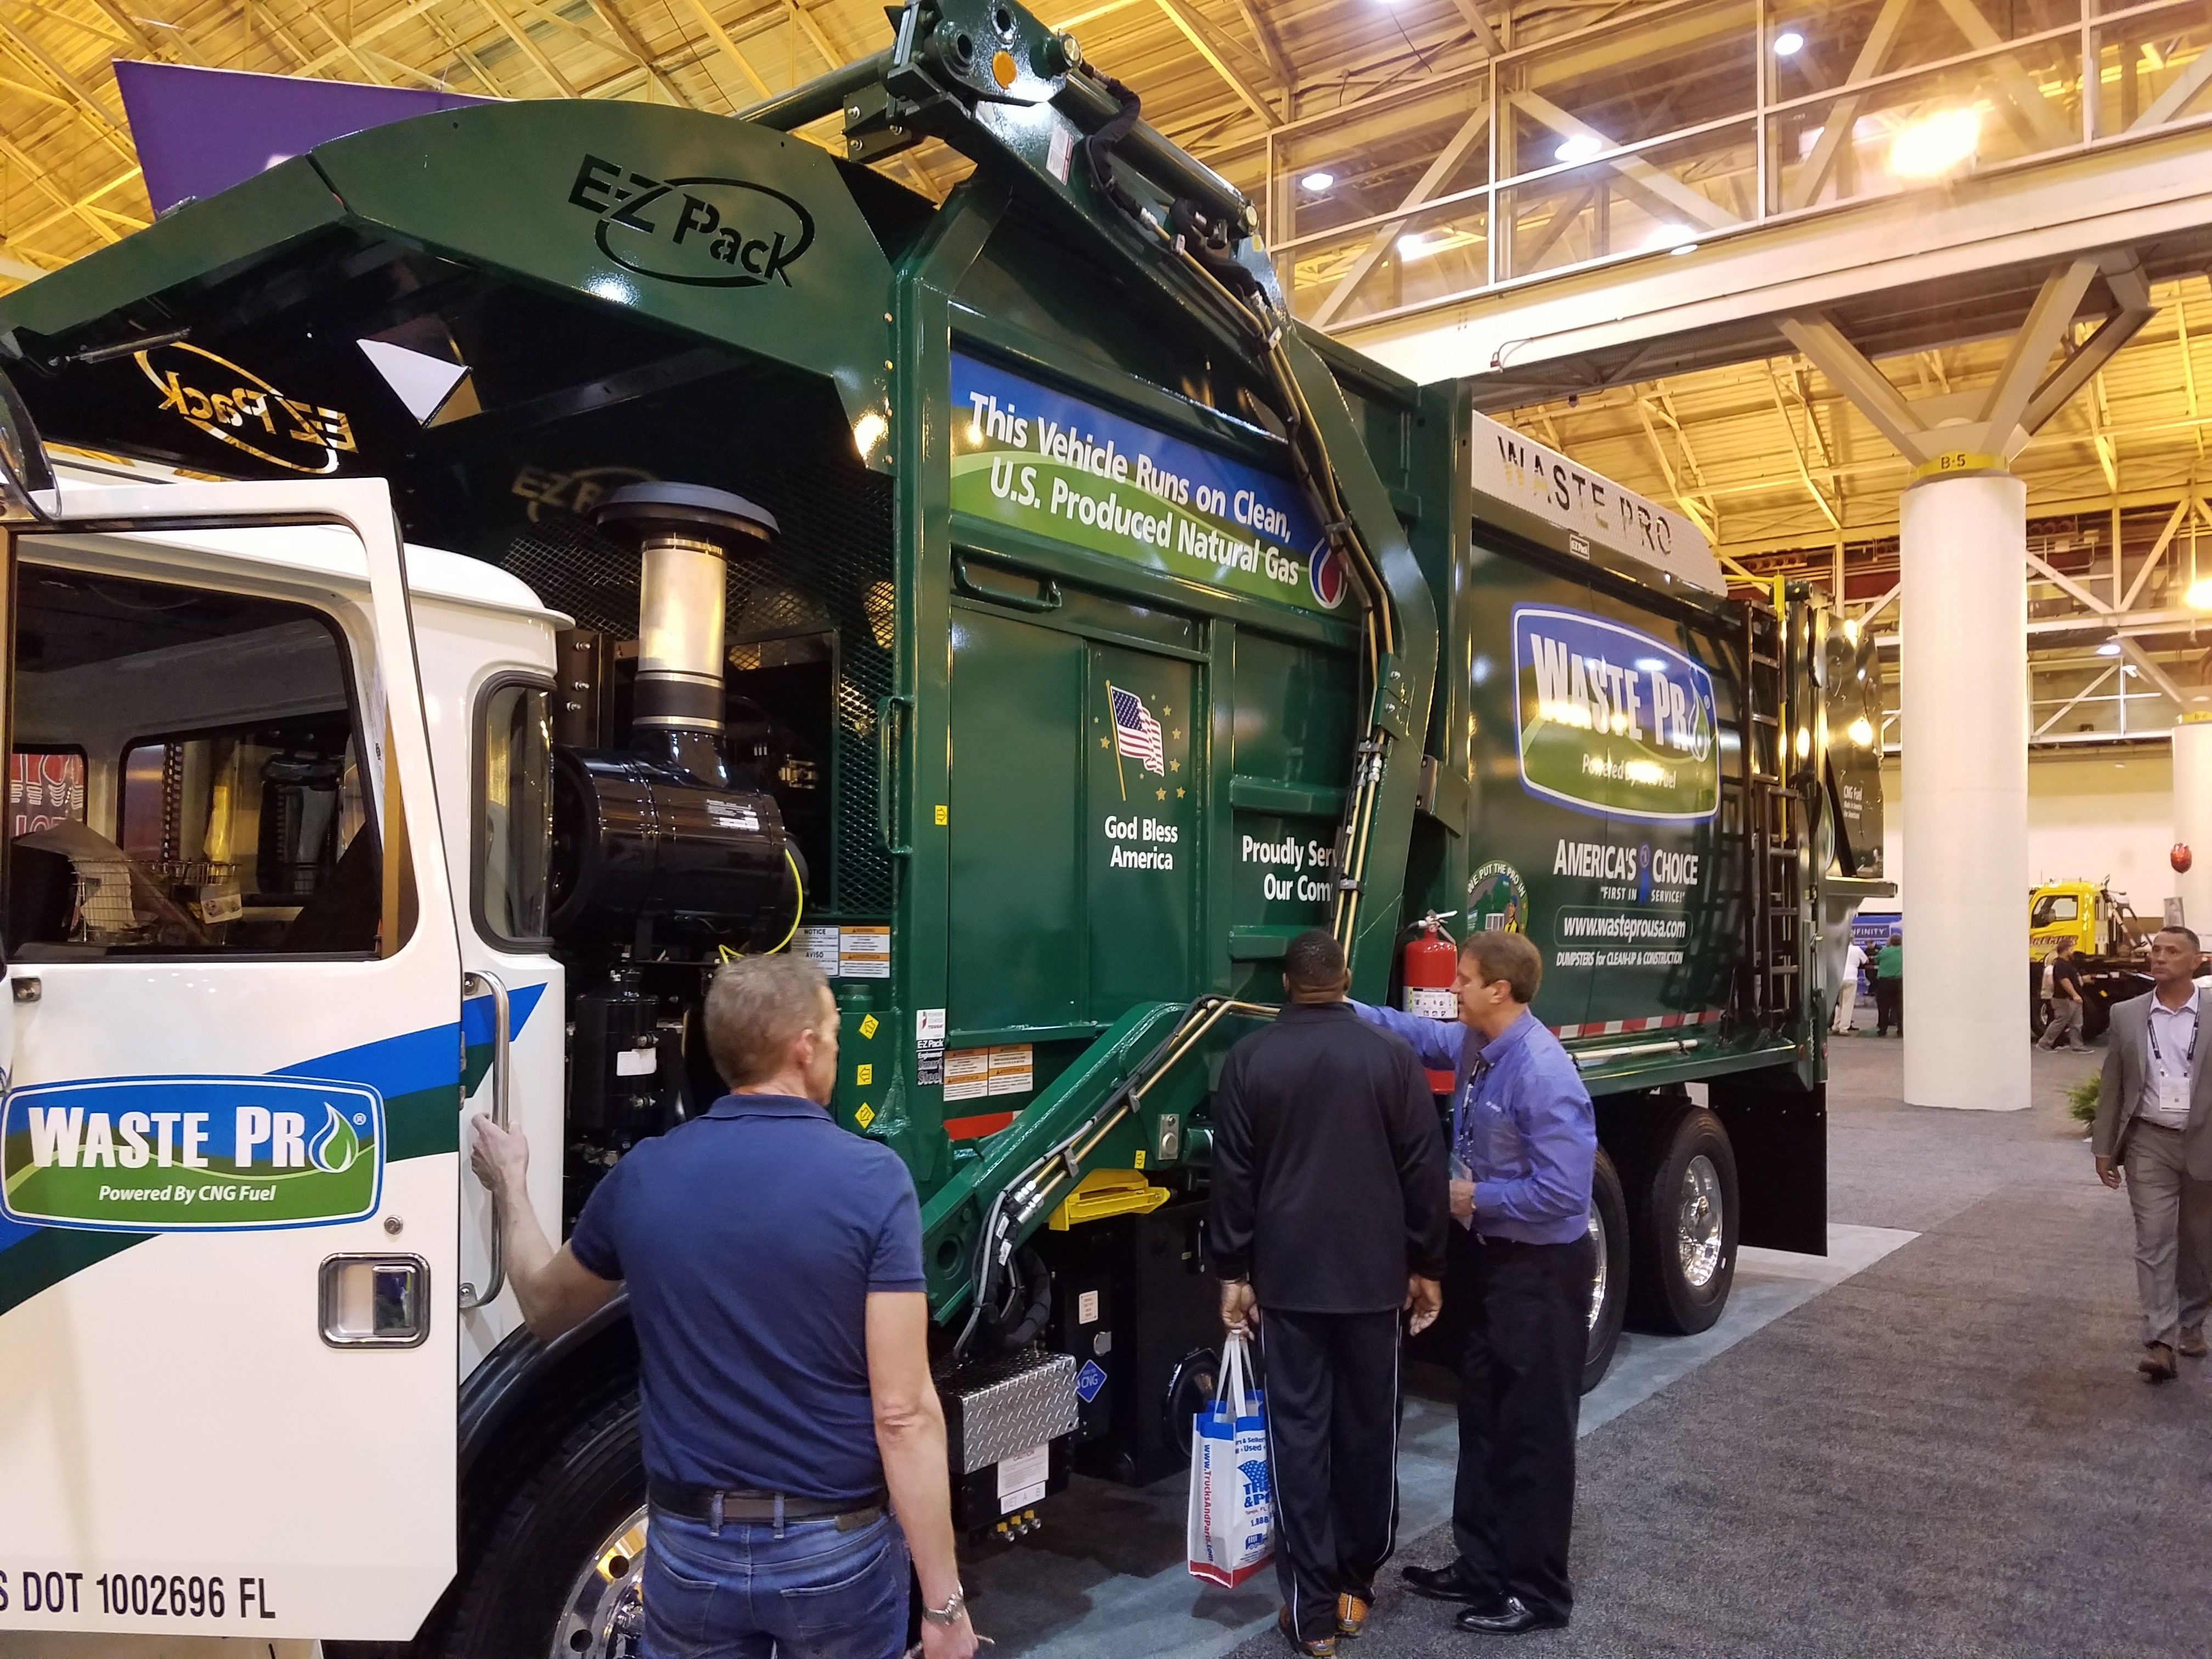 Waste Expo’s First Day of Exhibits Opens to Crowded People Waste